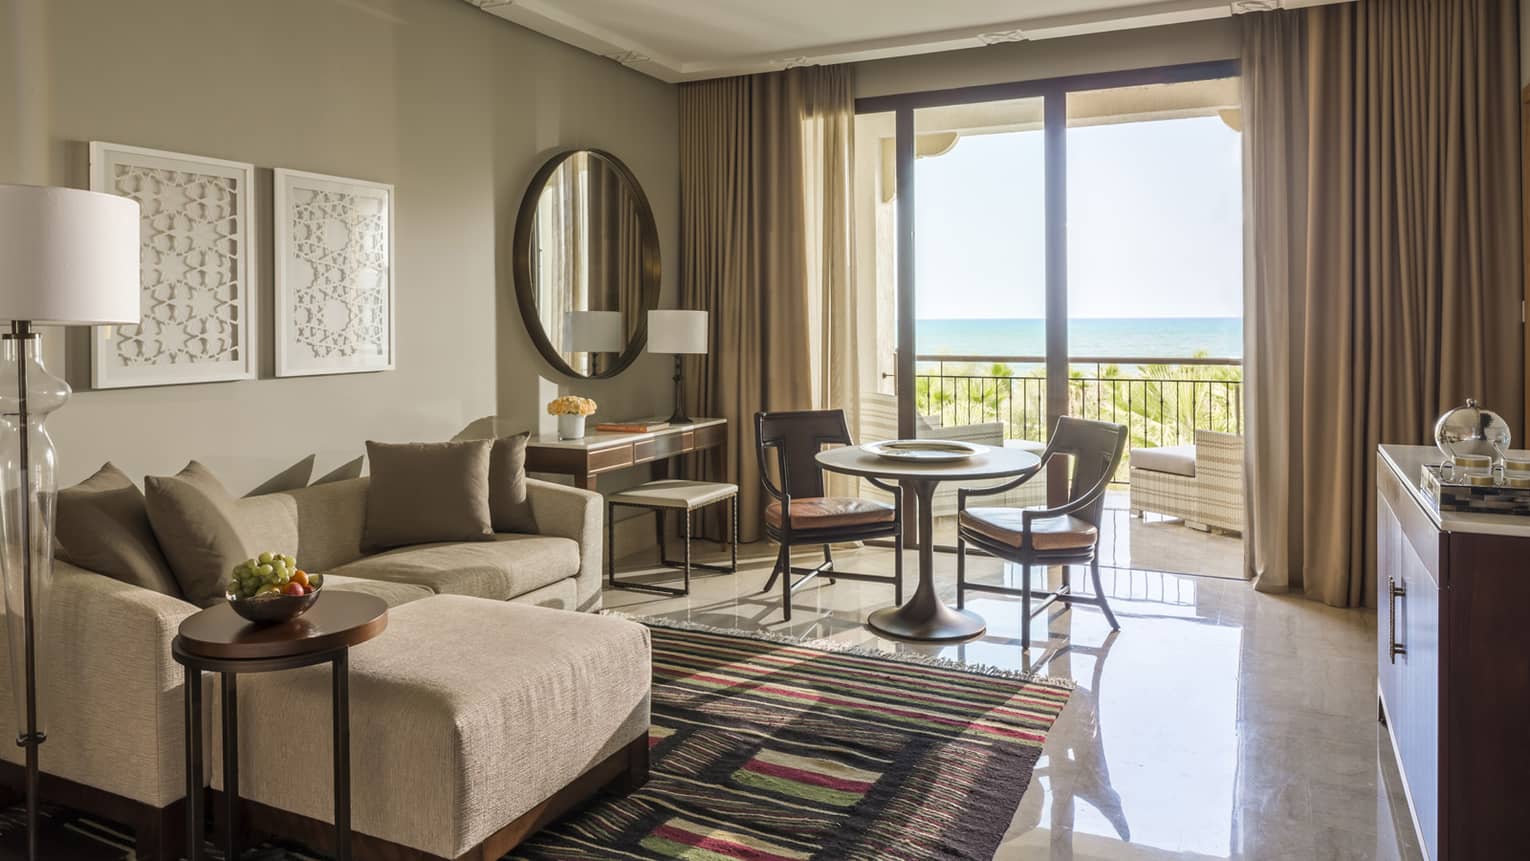 Deluxe Sea View hotel room with modular sofa, small table and chairs by sunny balcony doors